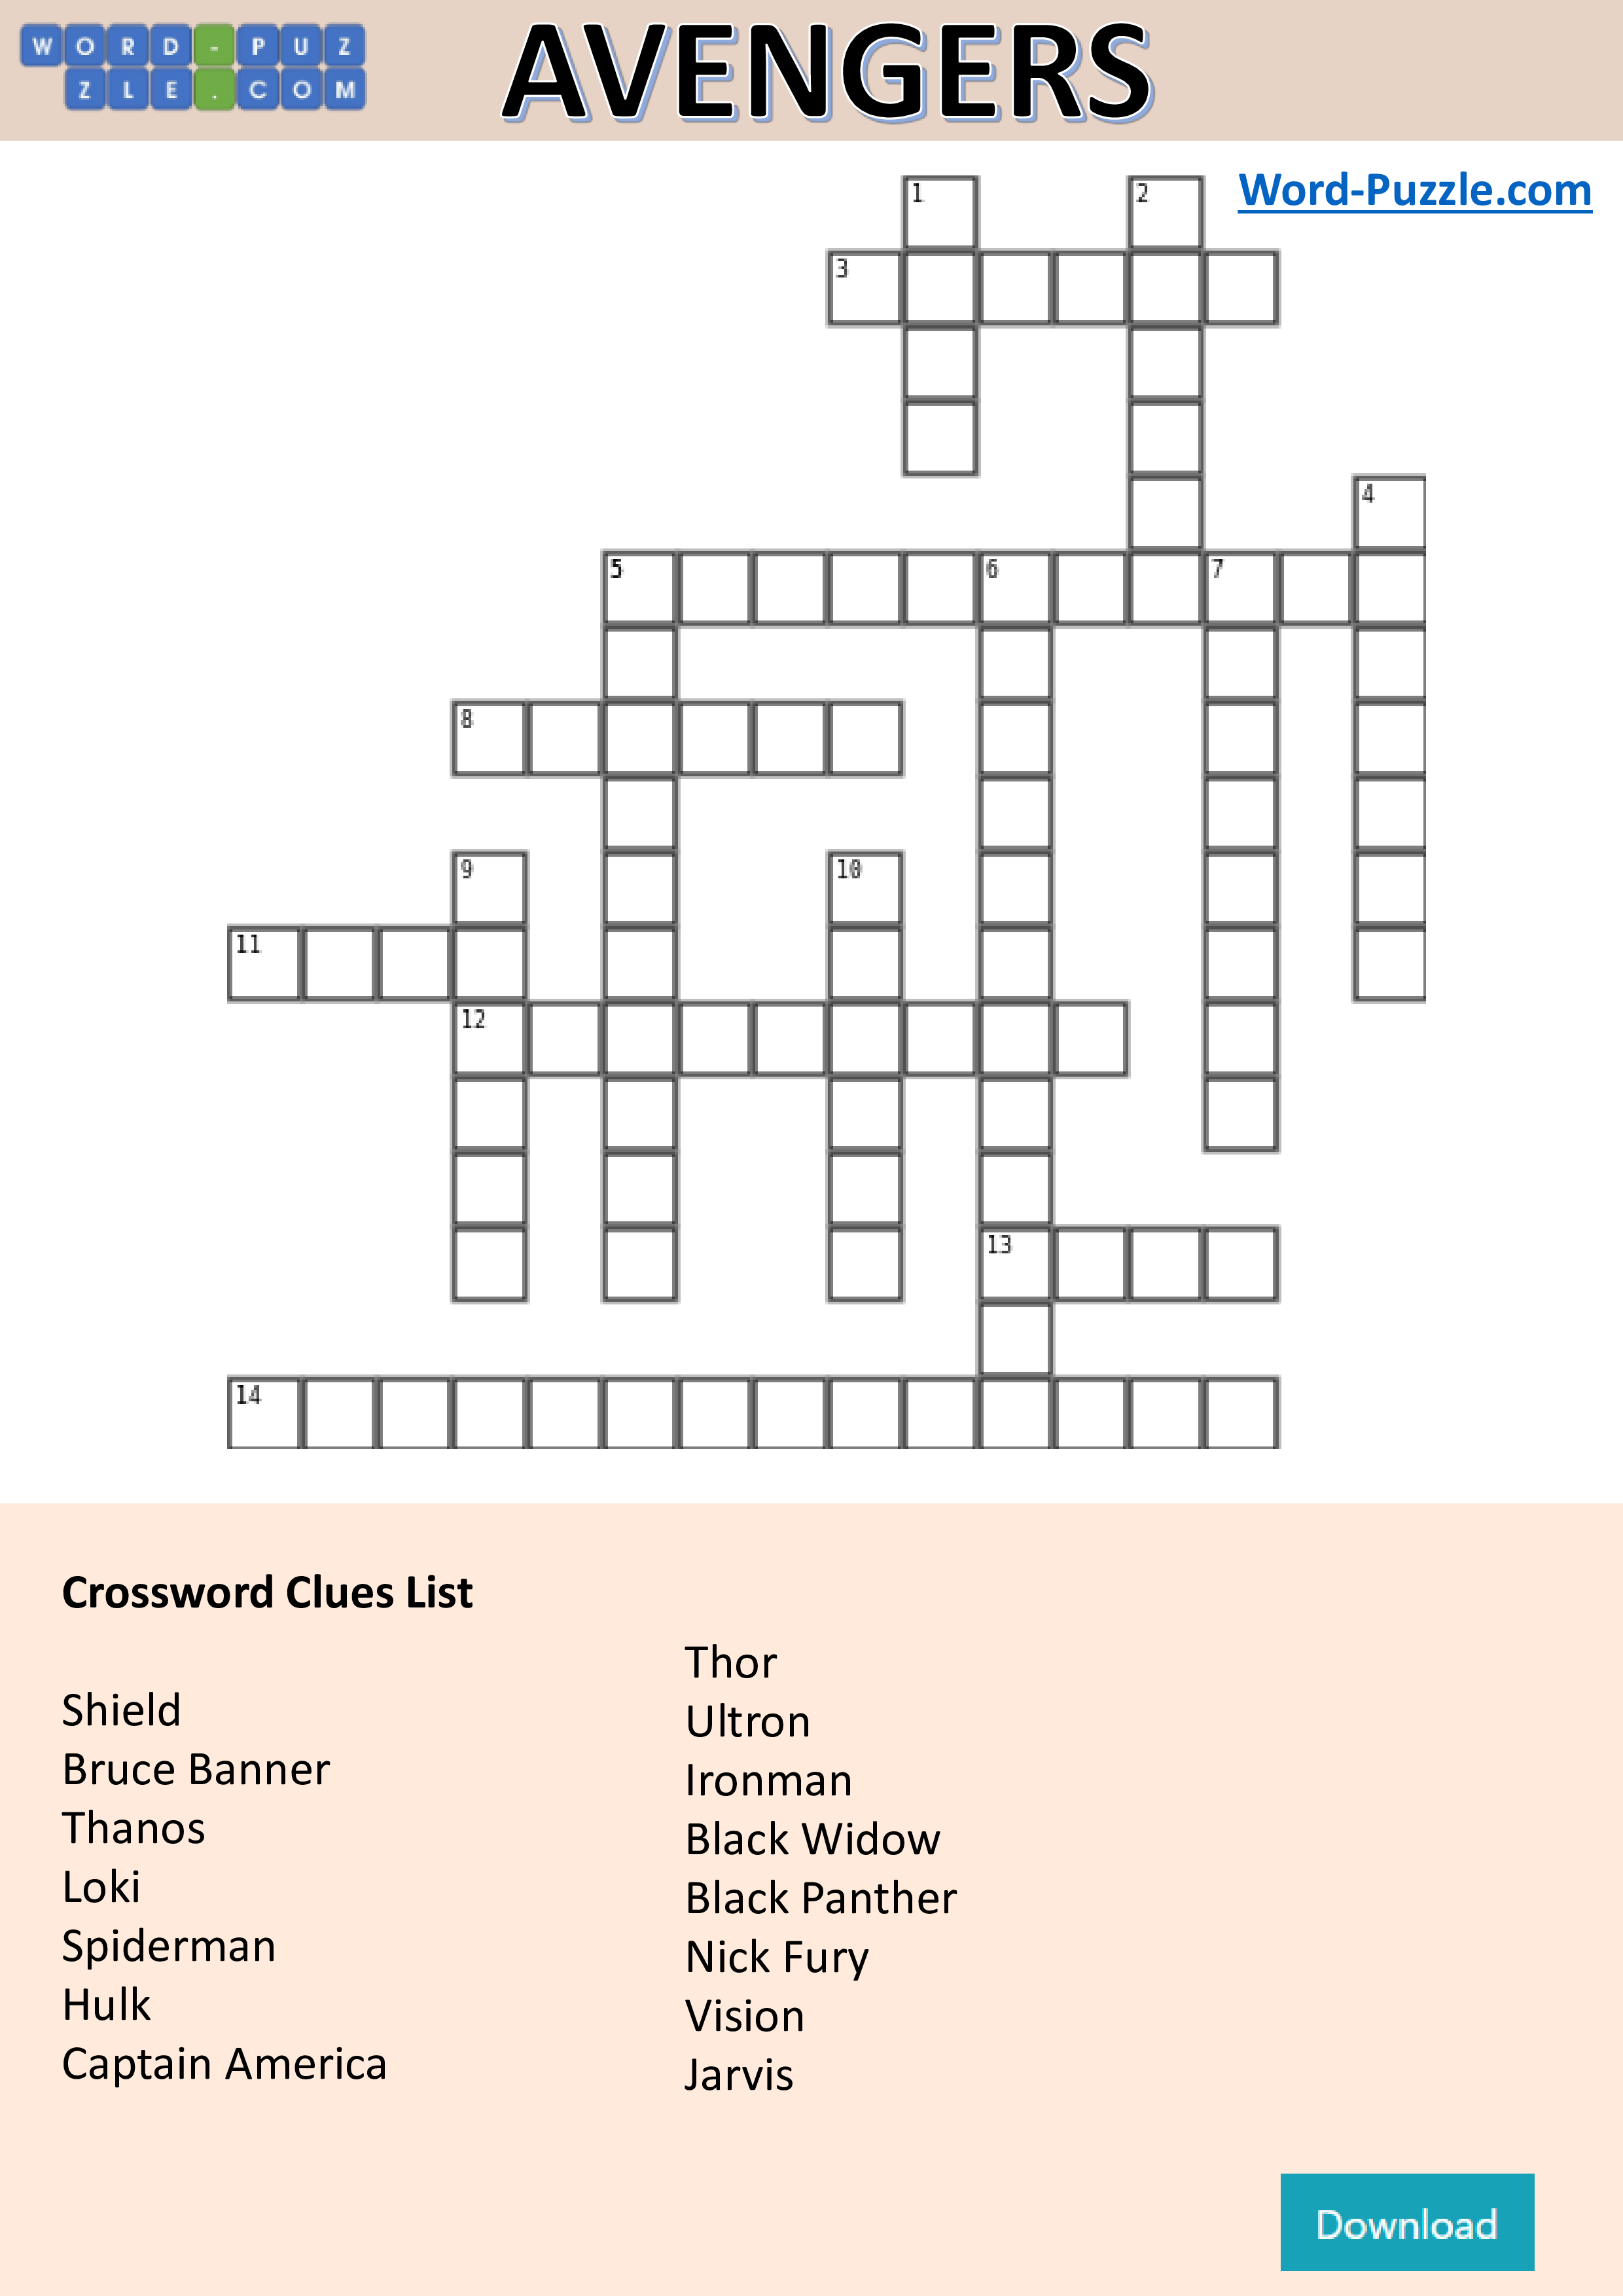 The Avengers Crossword Templates at